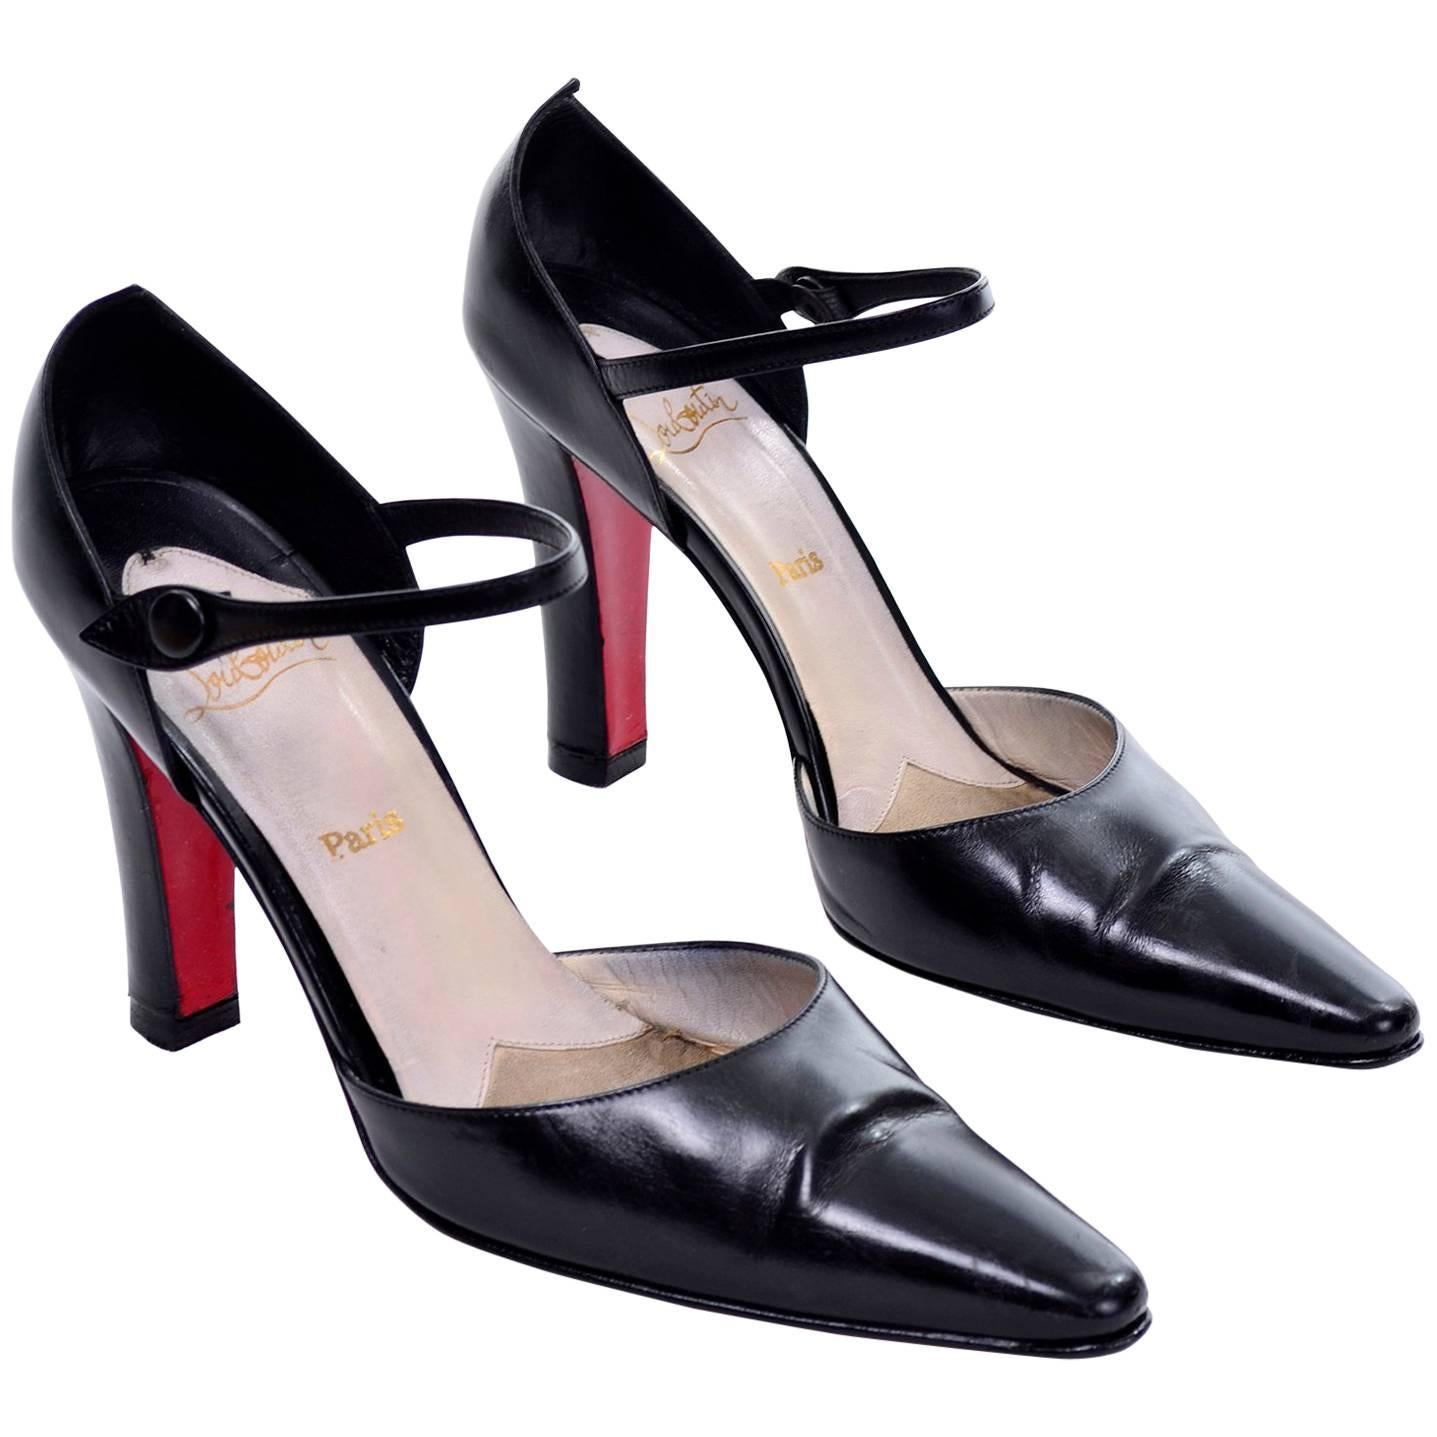 Vintage Christian Louboutin Mulano Black Calf Leather Pumps w/ Red Soles Size 7